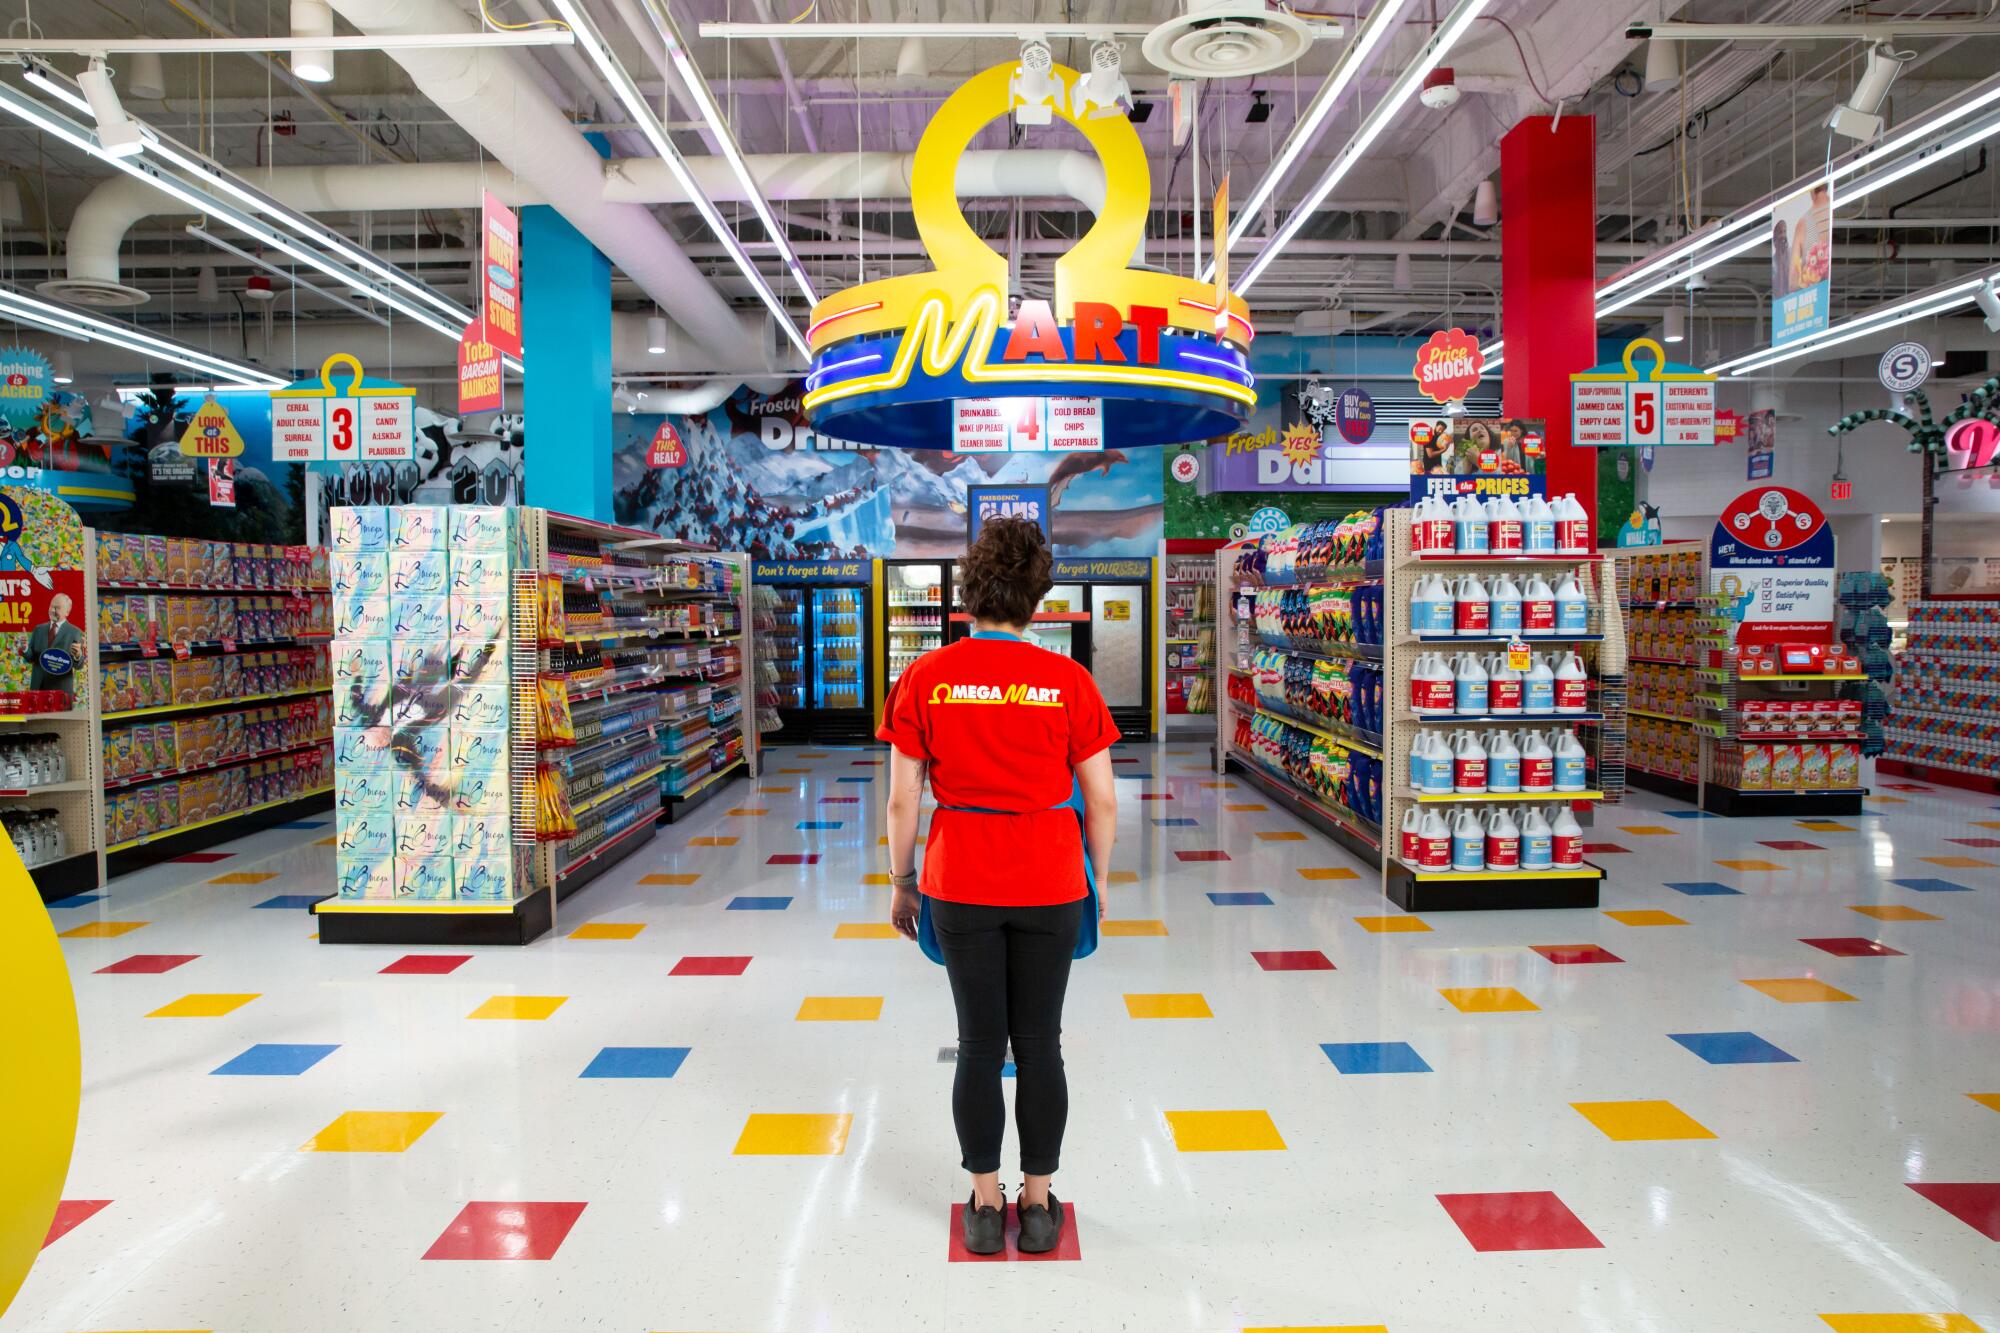 Meow Wolf's "Omega Mart" starts with a twisted take on a grocery store, complete with fake produts. 